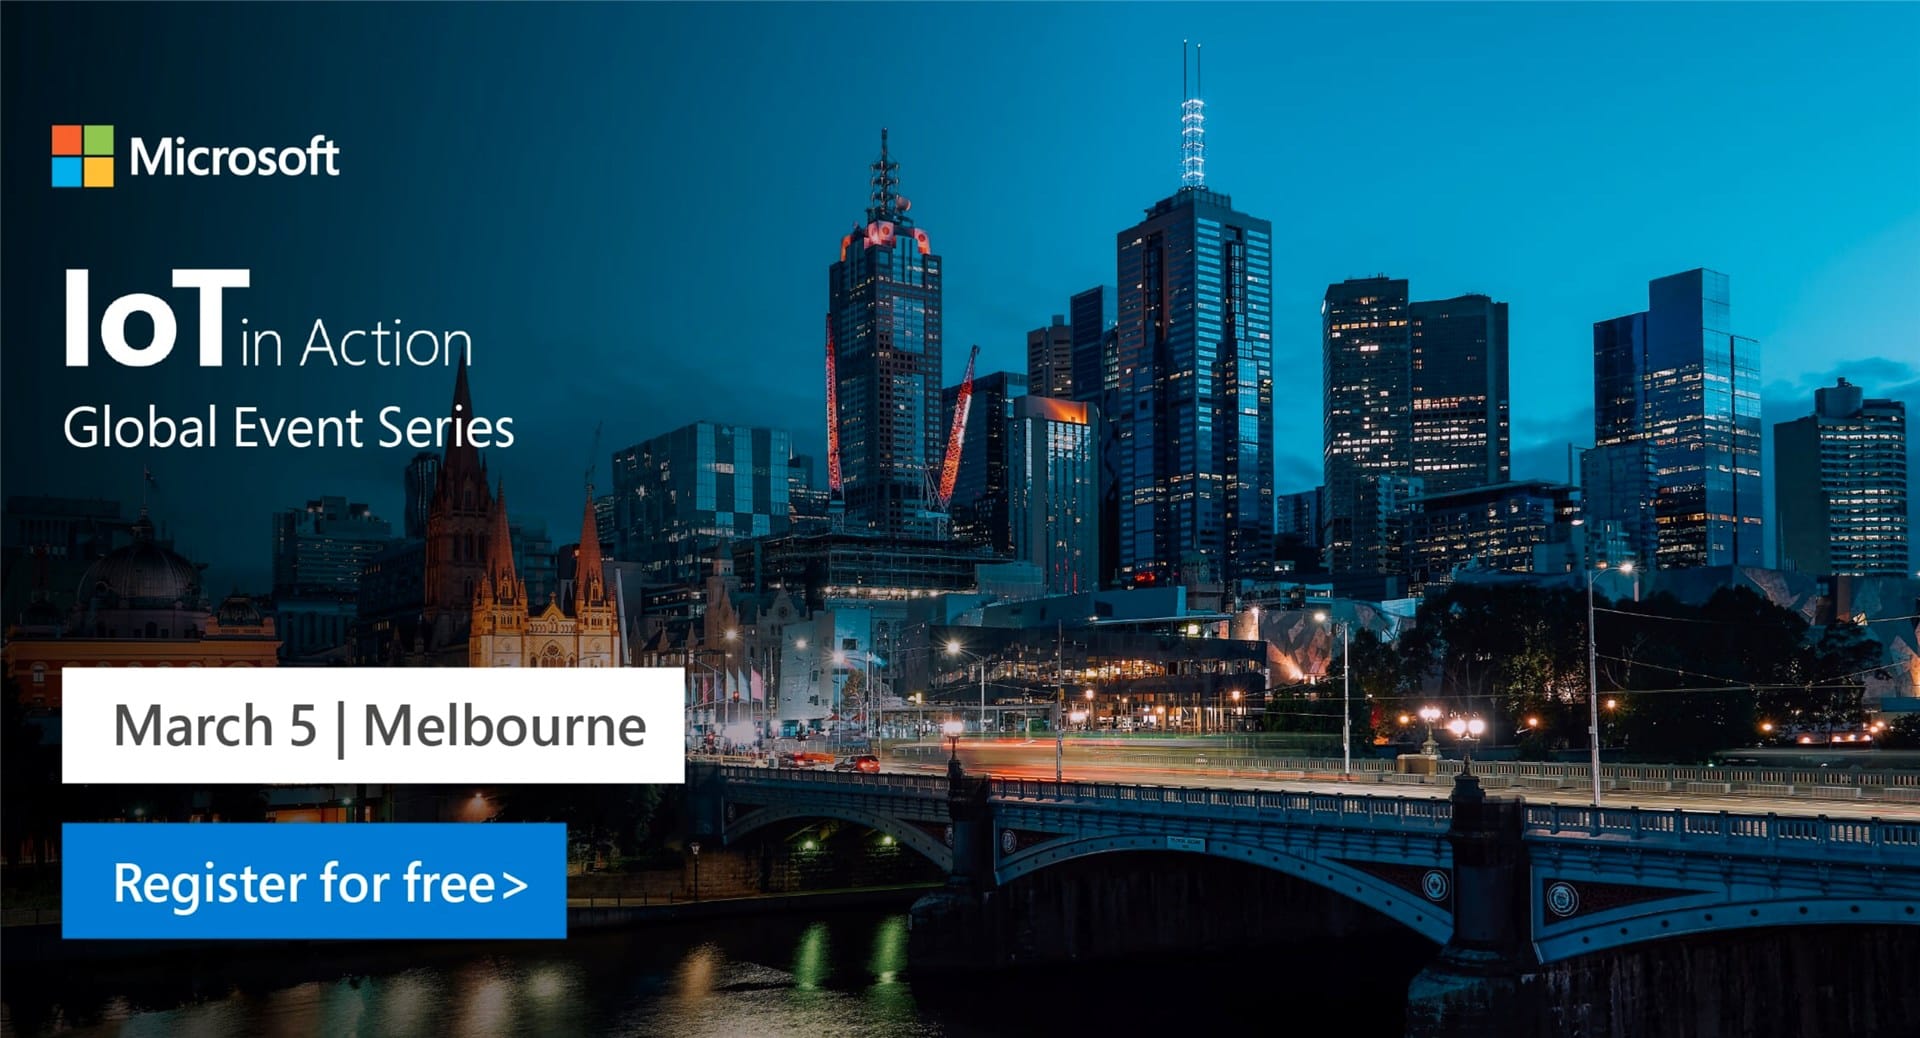 Microsoft IoT in Action Event for this year is being held in Melbourne. Registration opens NOW